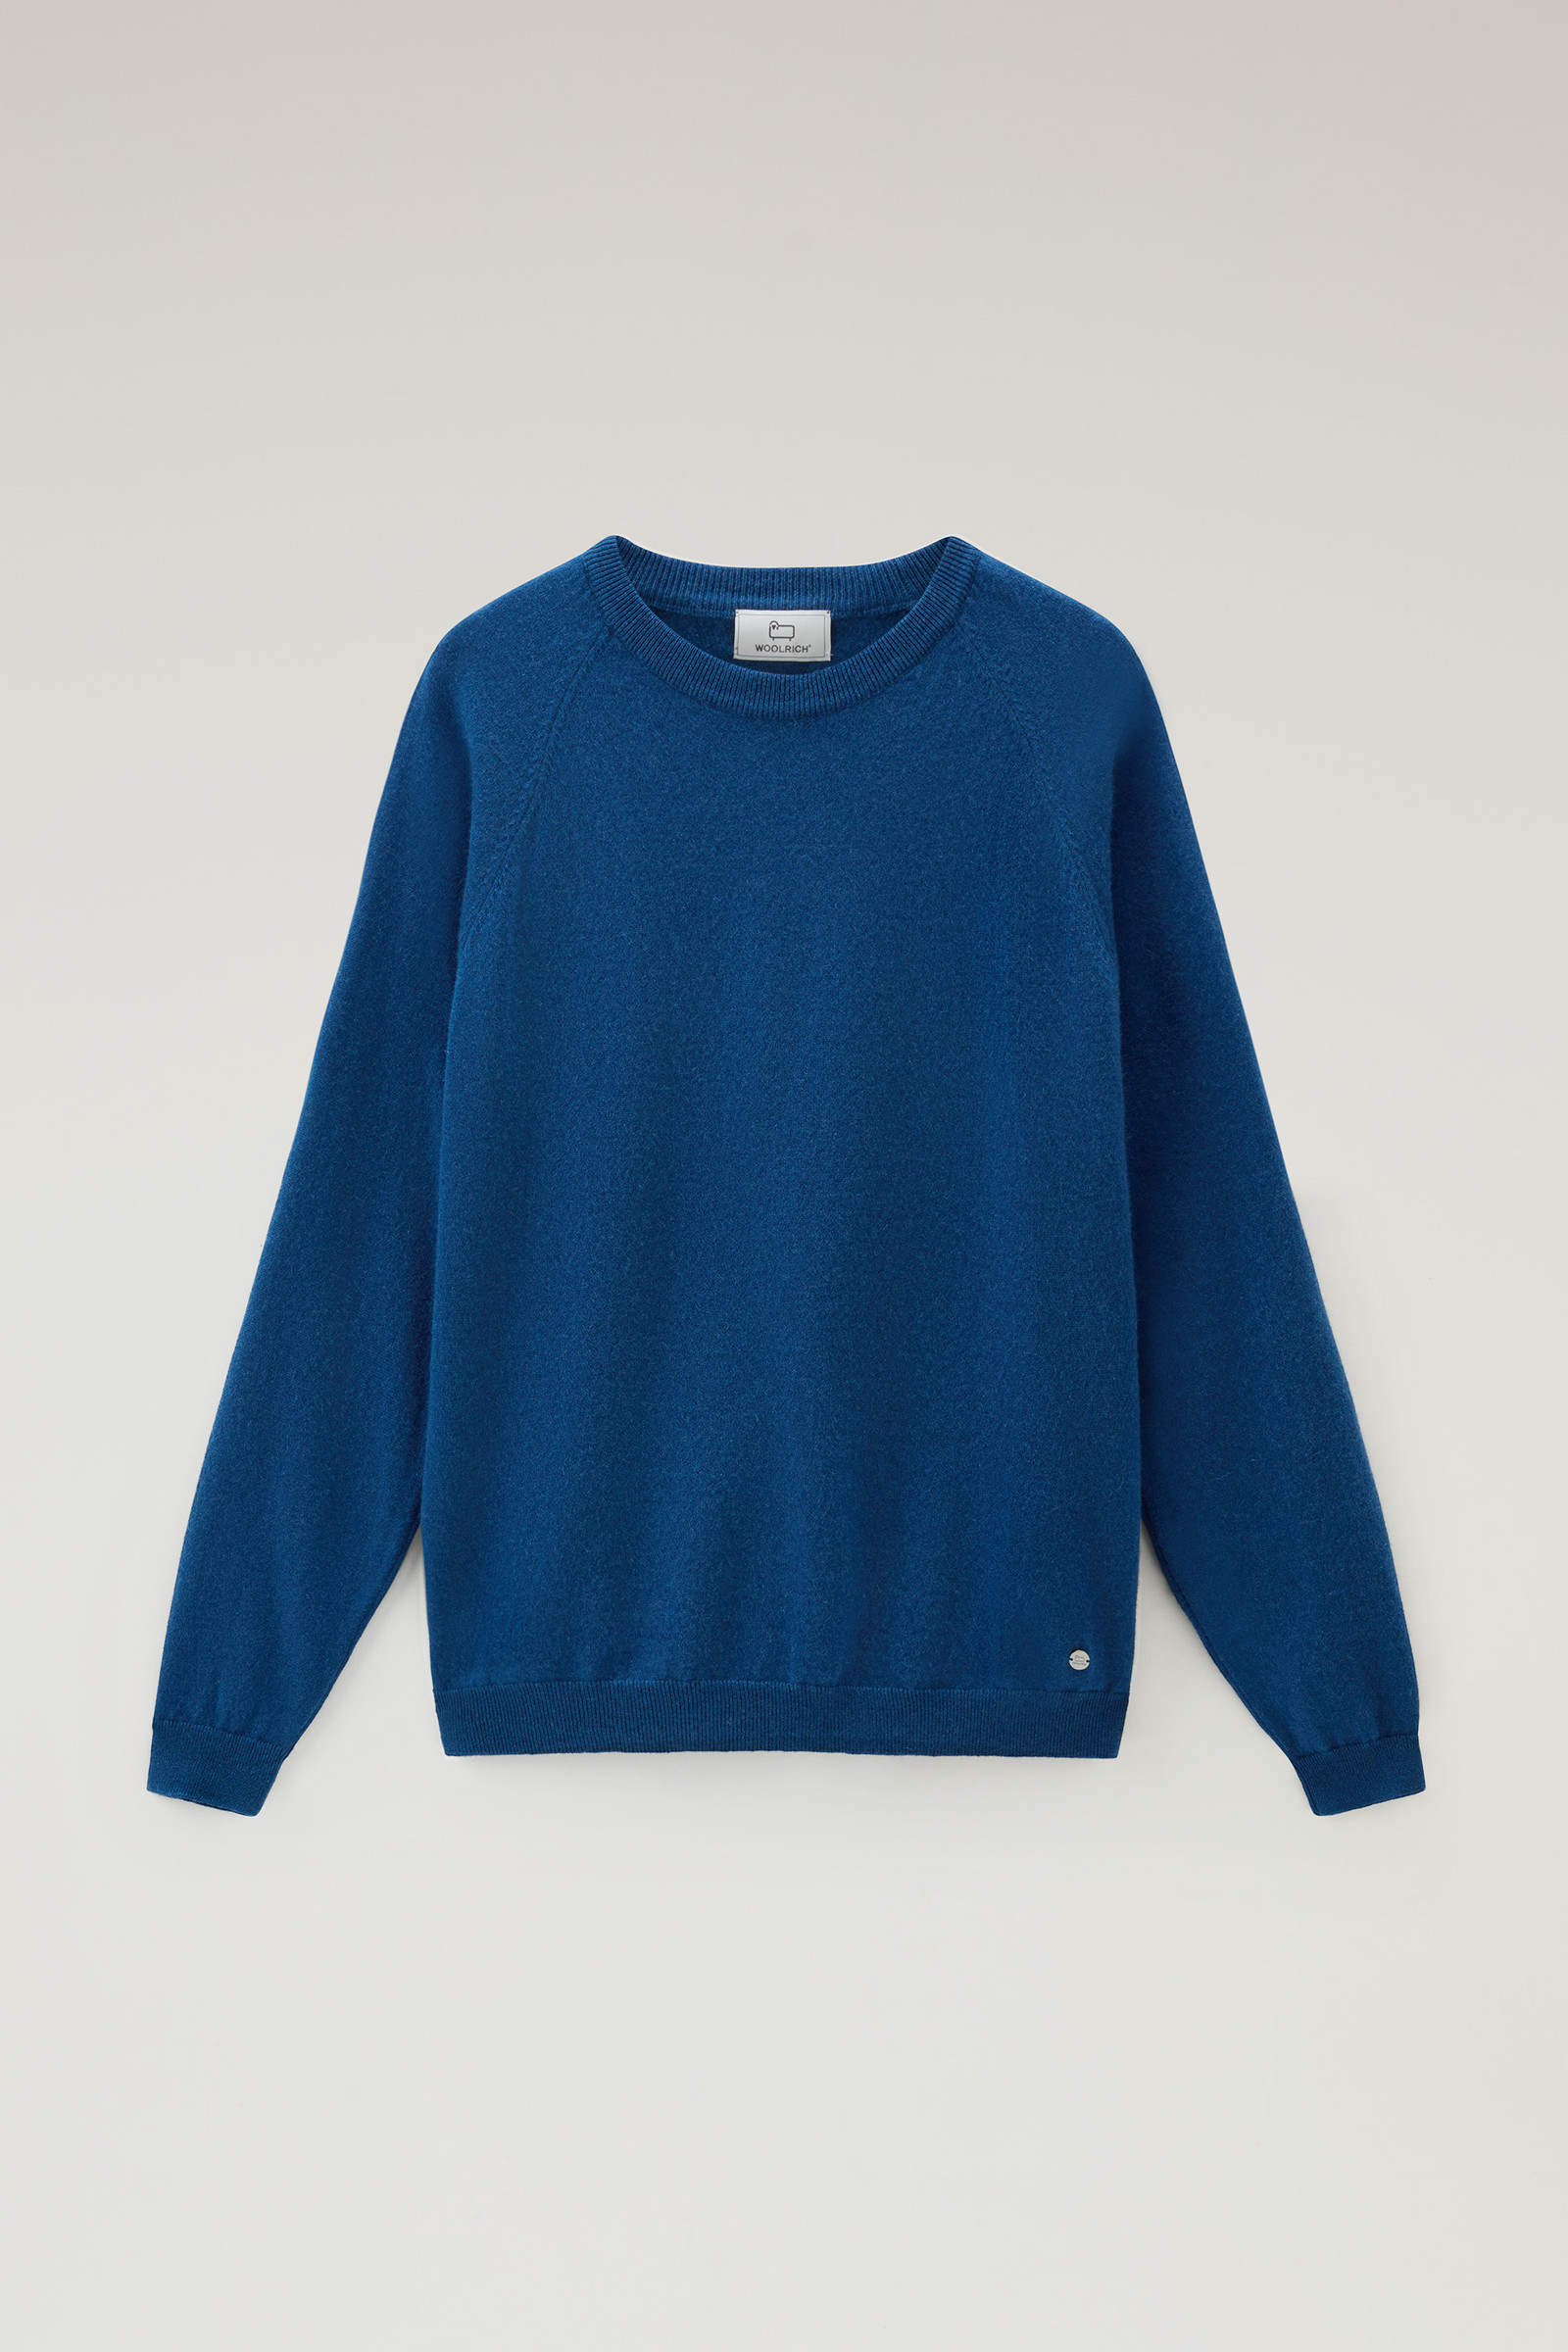 Men's Luxe Crewneck Sweater in Pure Cashmere Blue | Woolrich USA